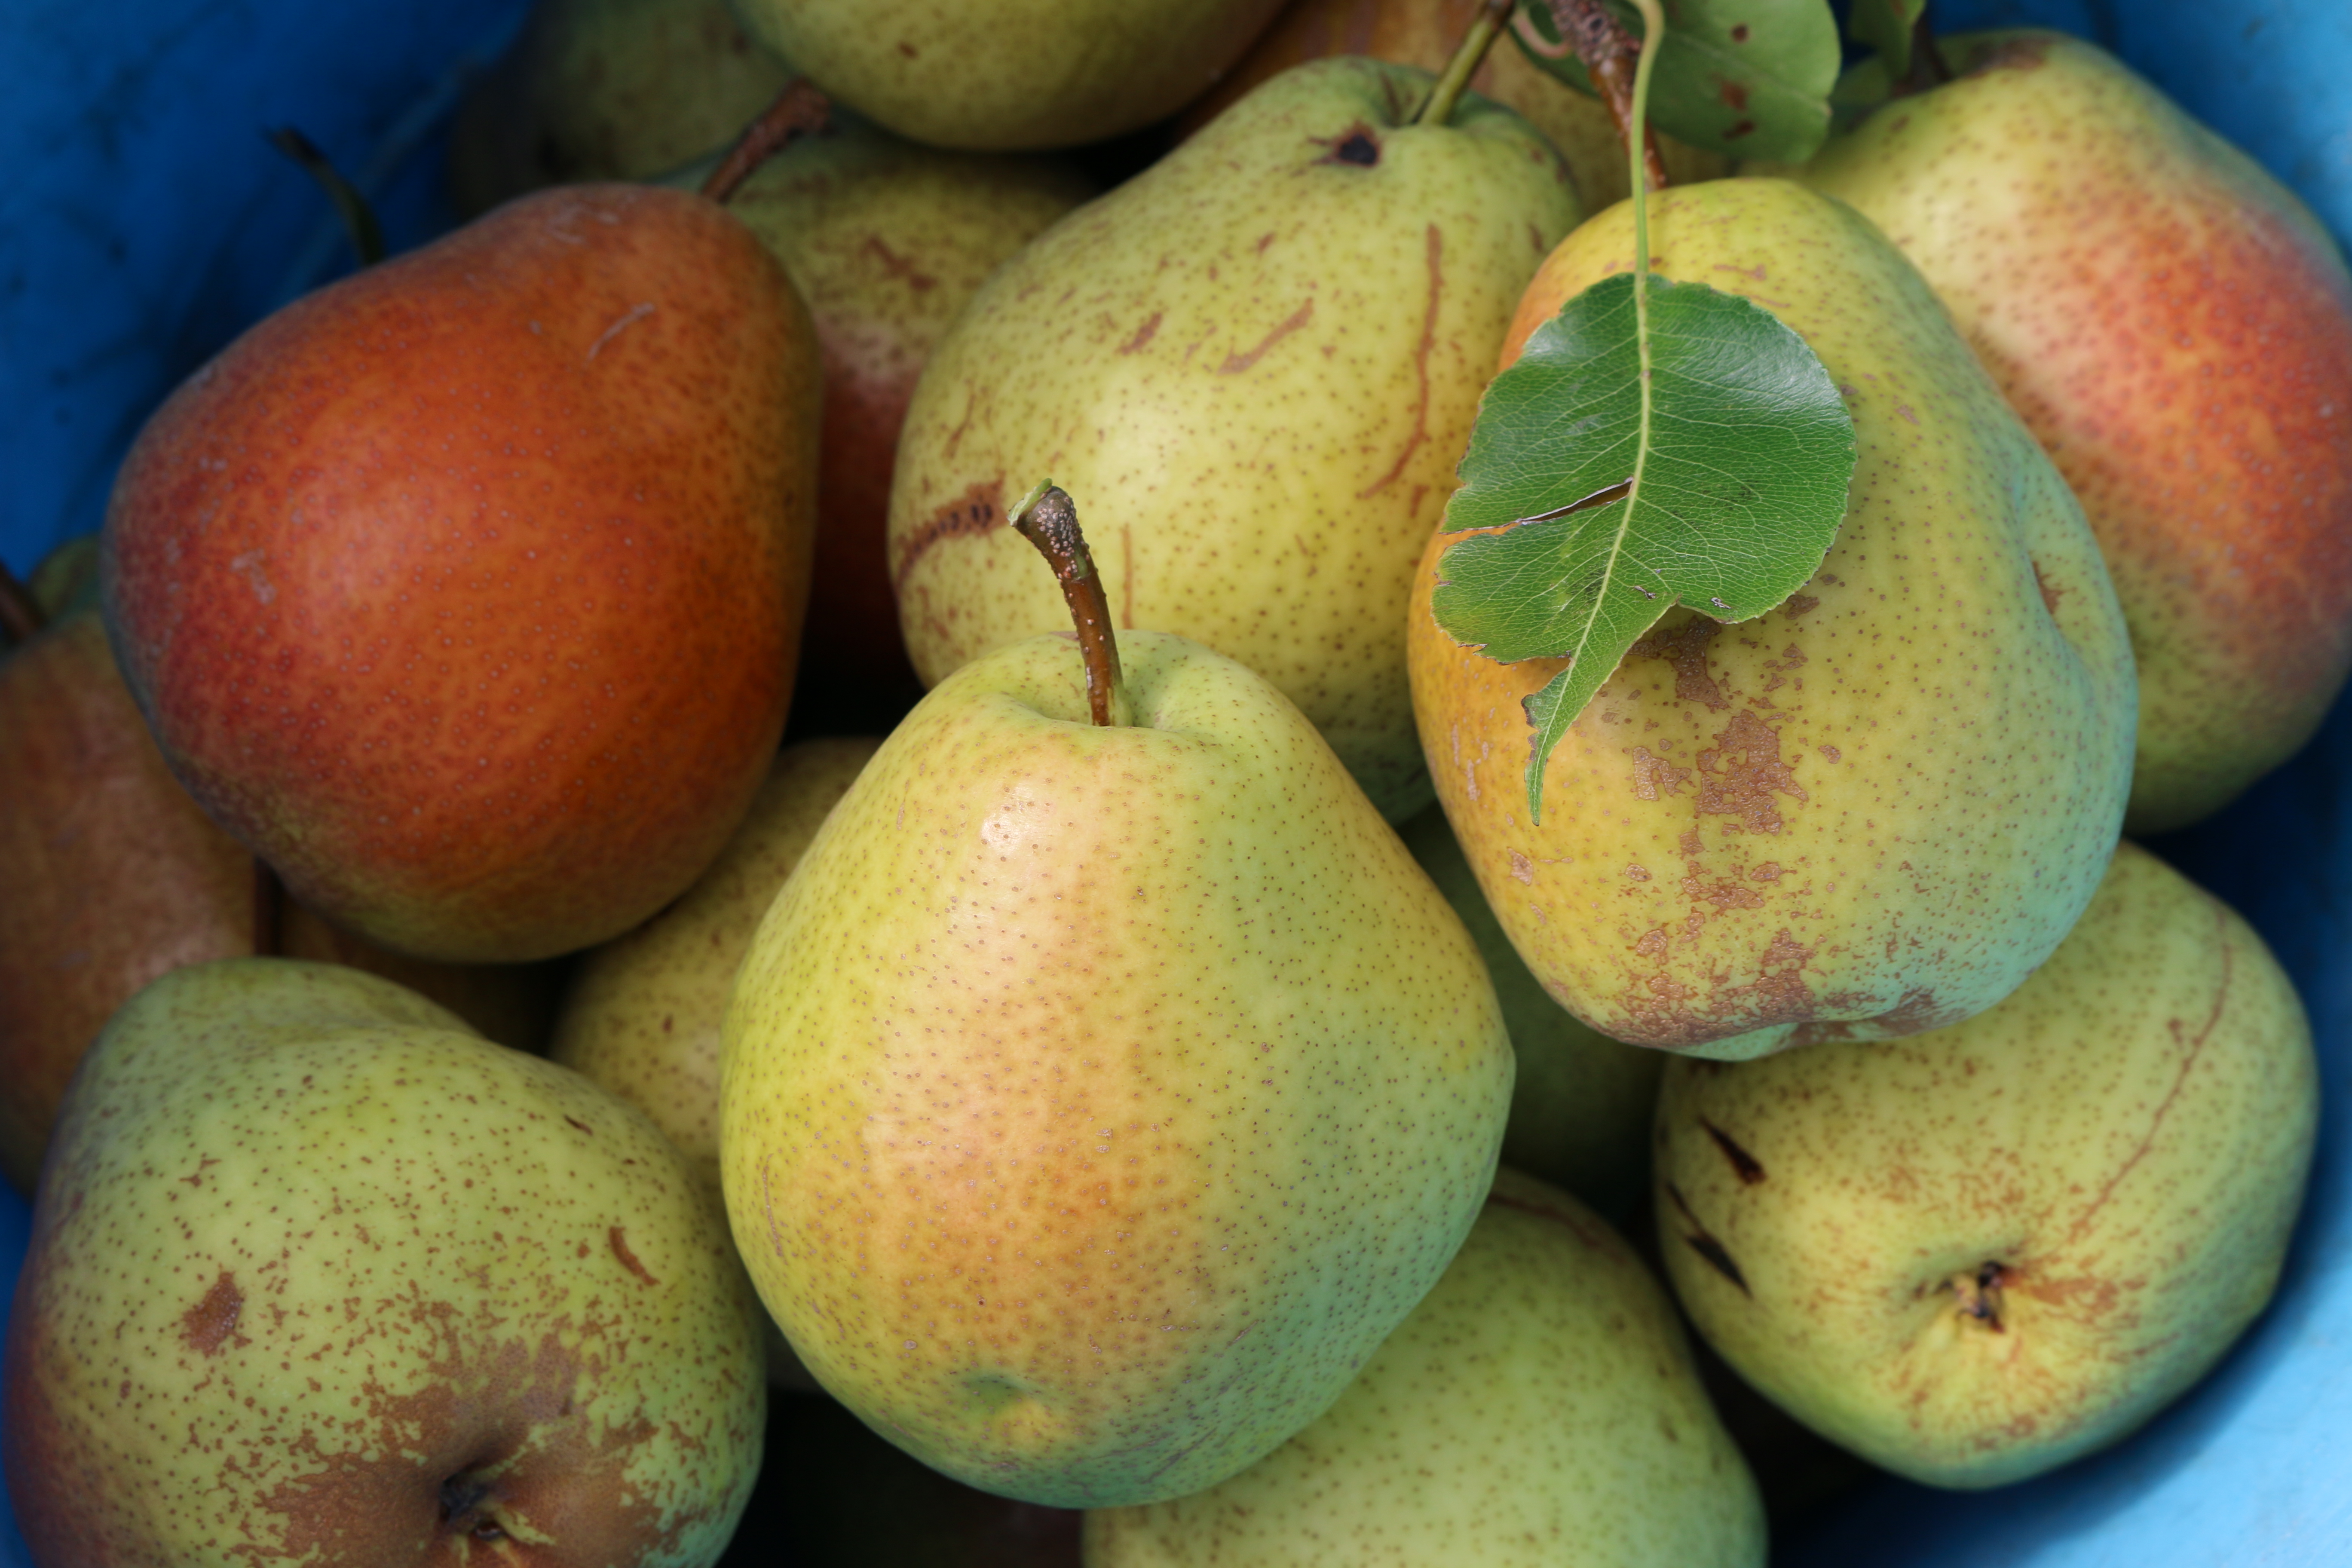 Supply Chain Scene, image of bruised pears 